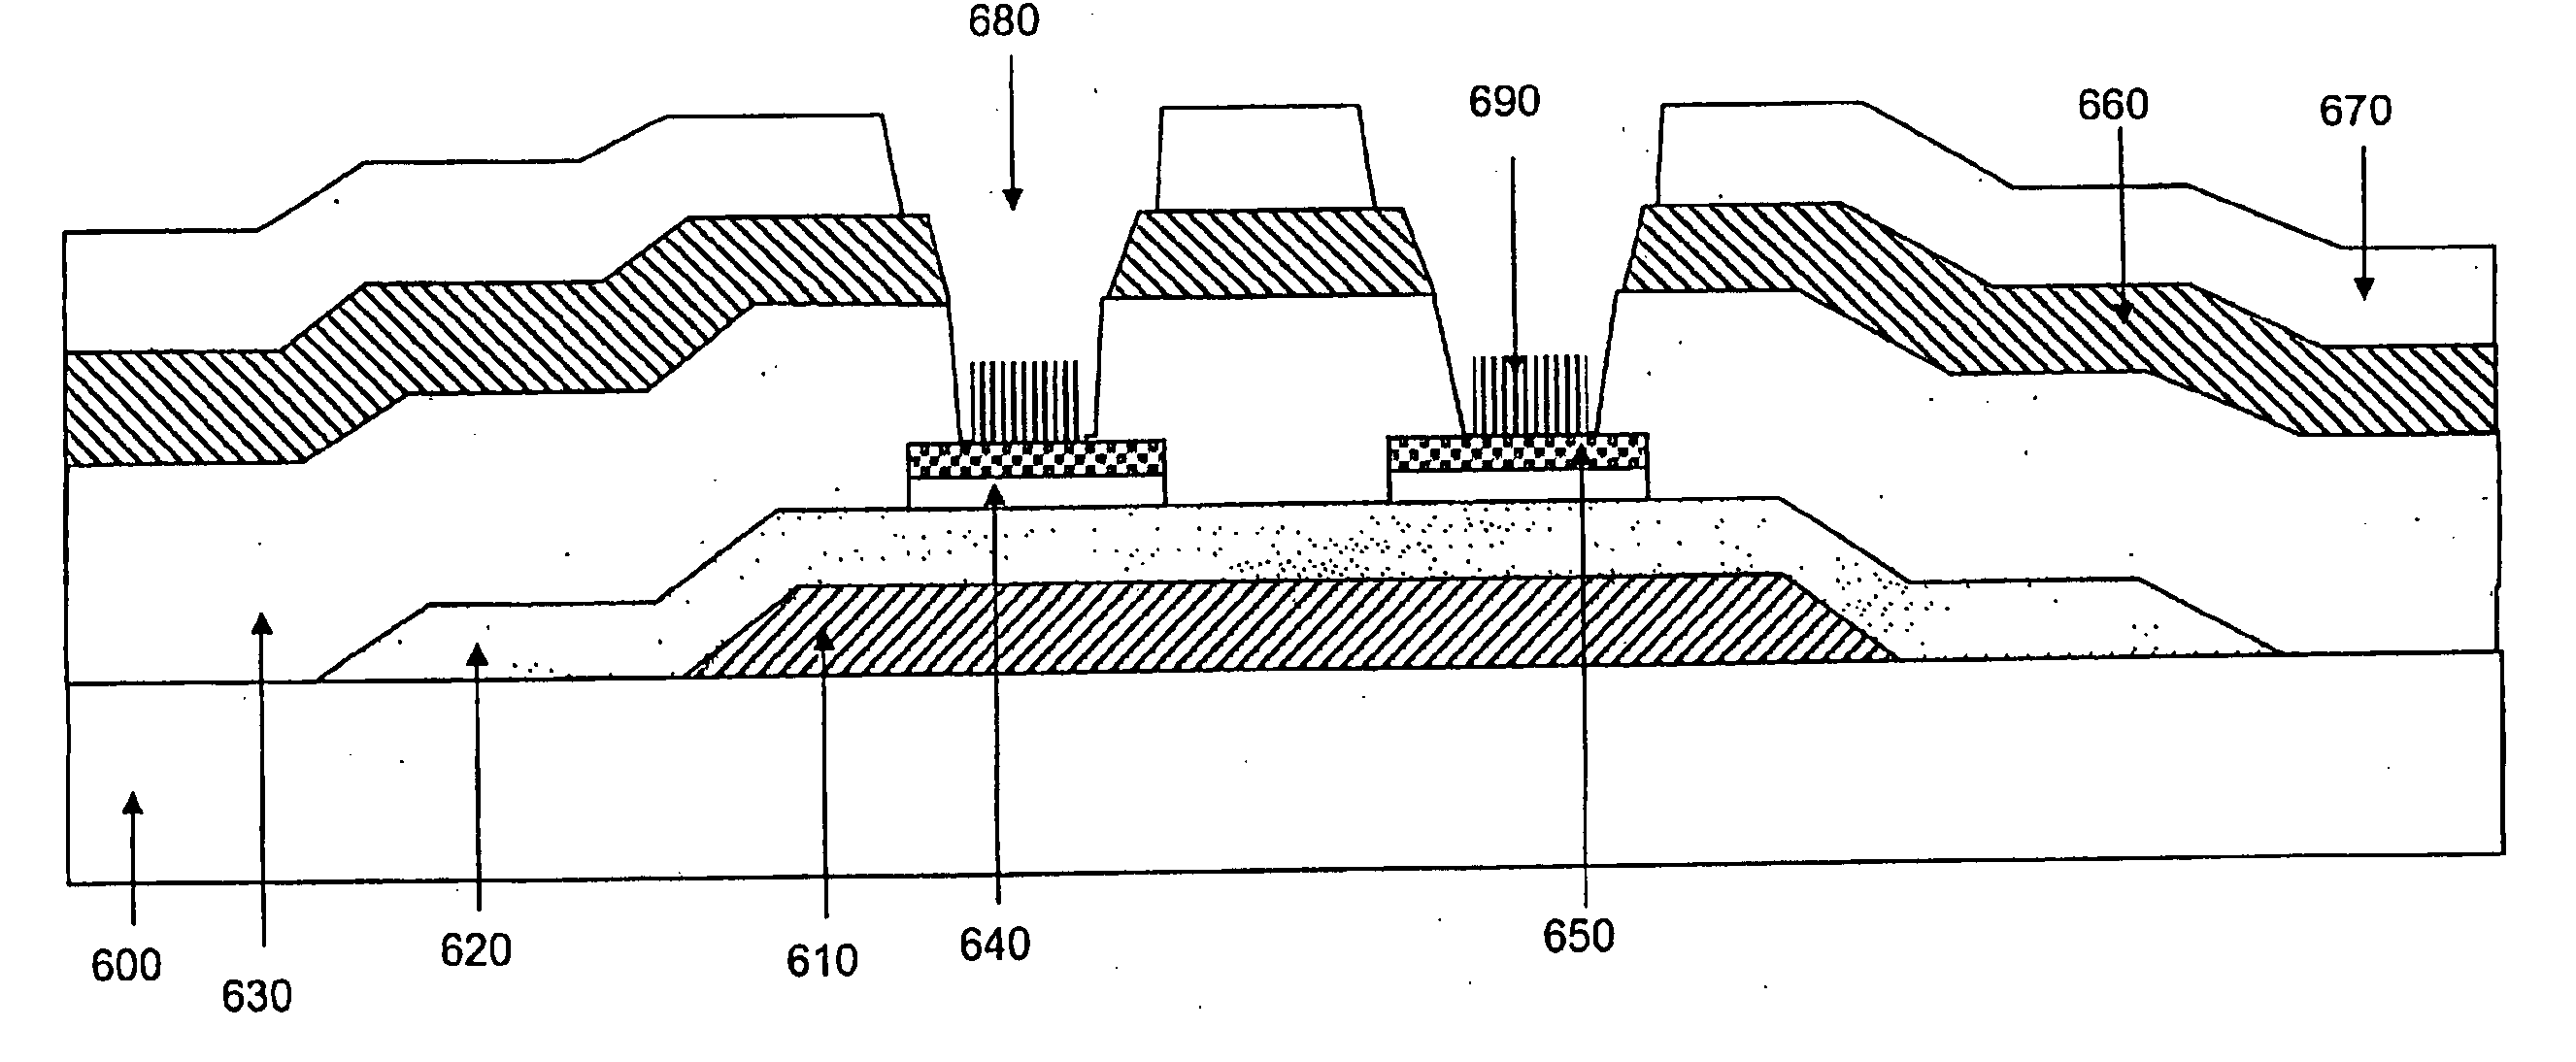 Barrier metal layer for a carbon nanotube flat panel display